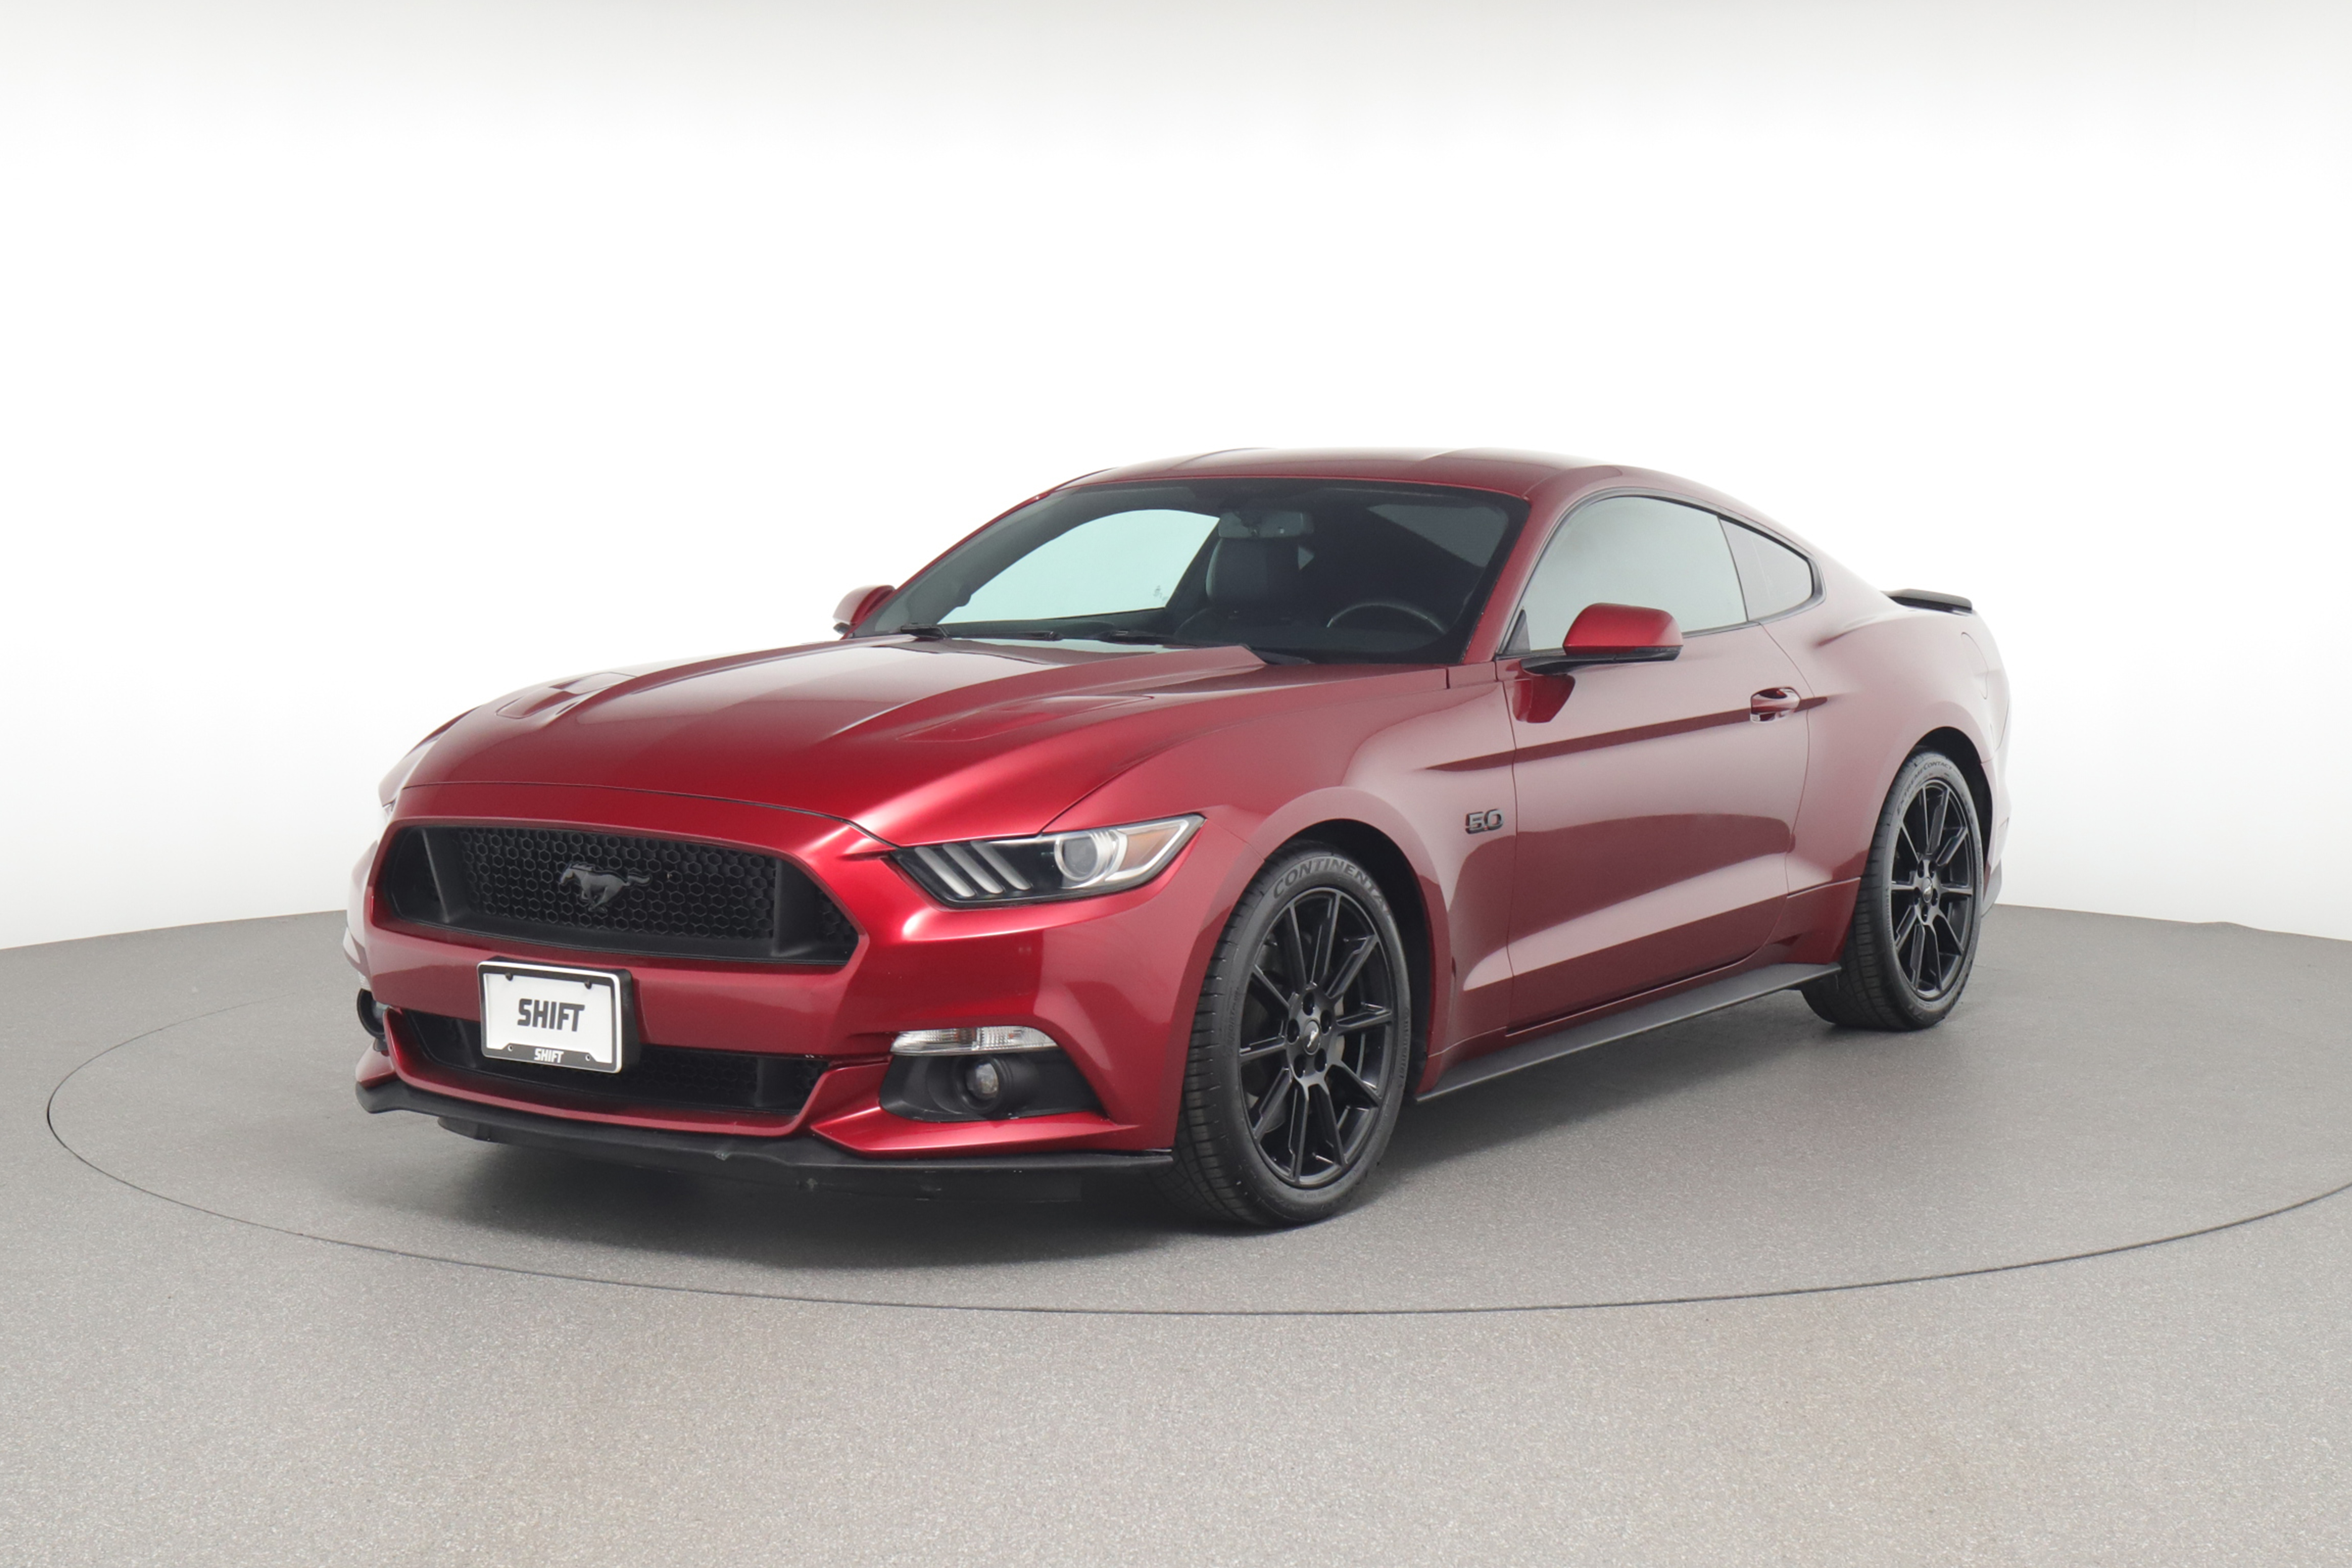 Buy A Used 2016 Ford Mustang Gt Premium For 30 450 Shift